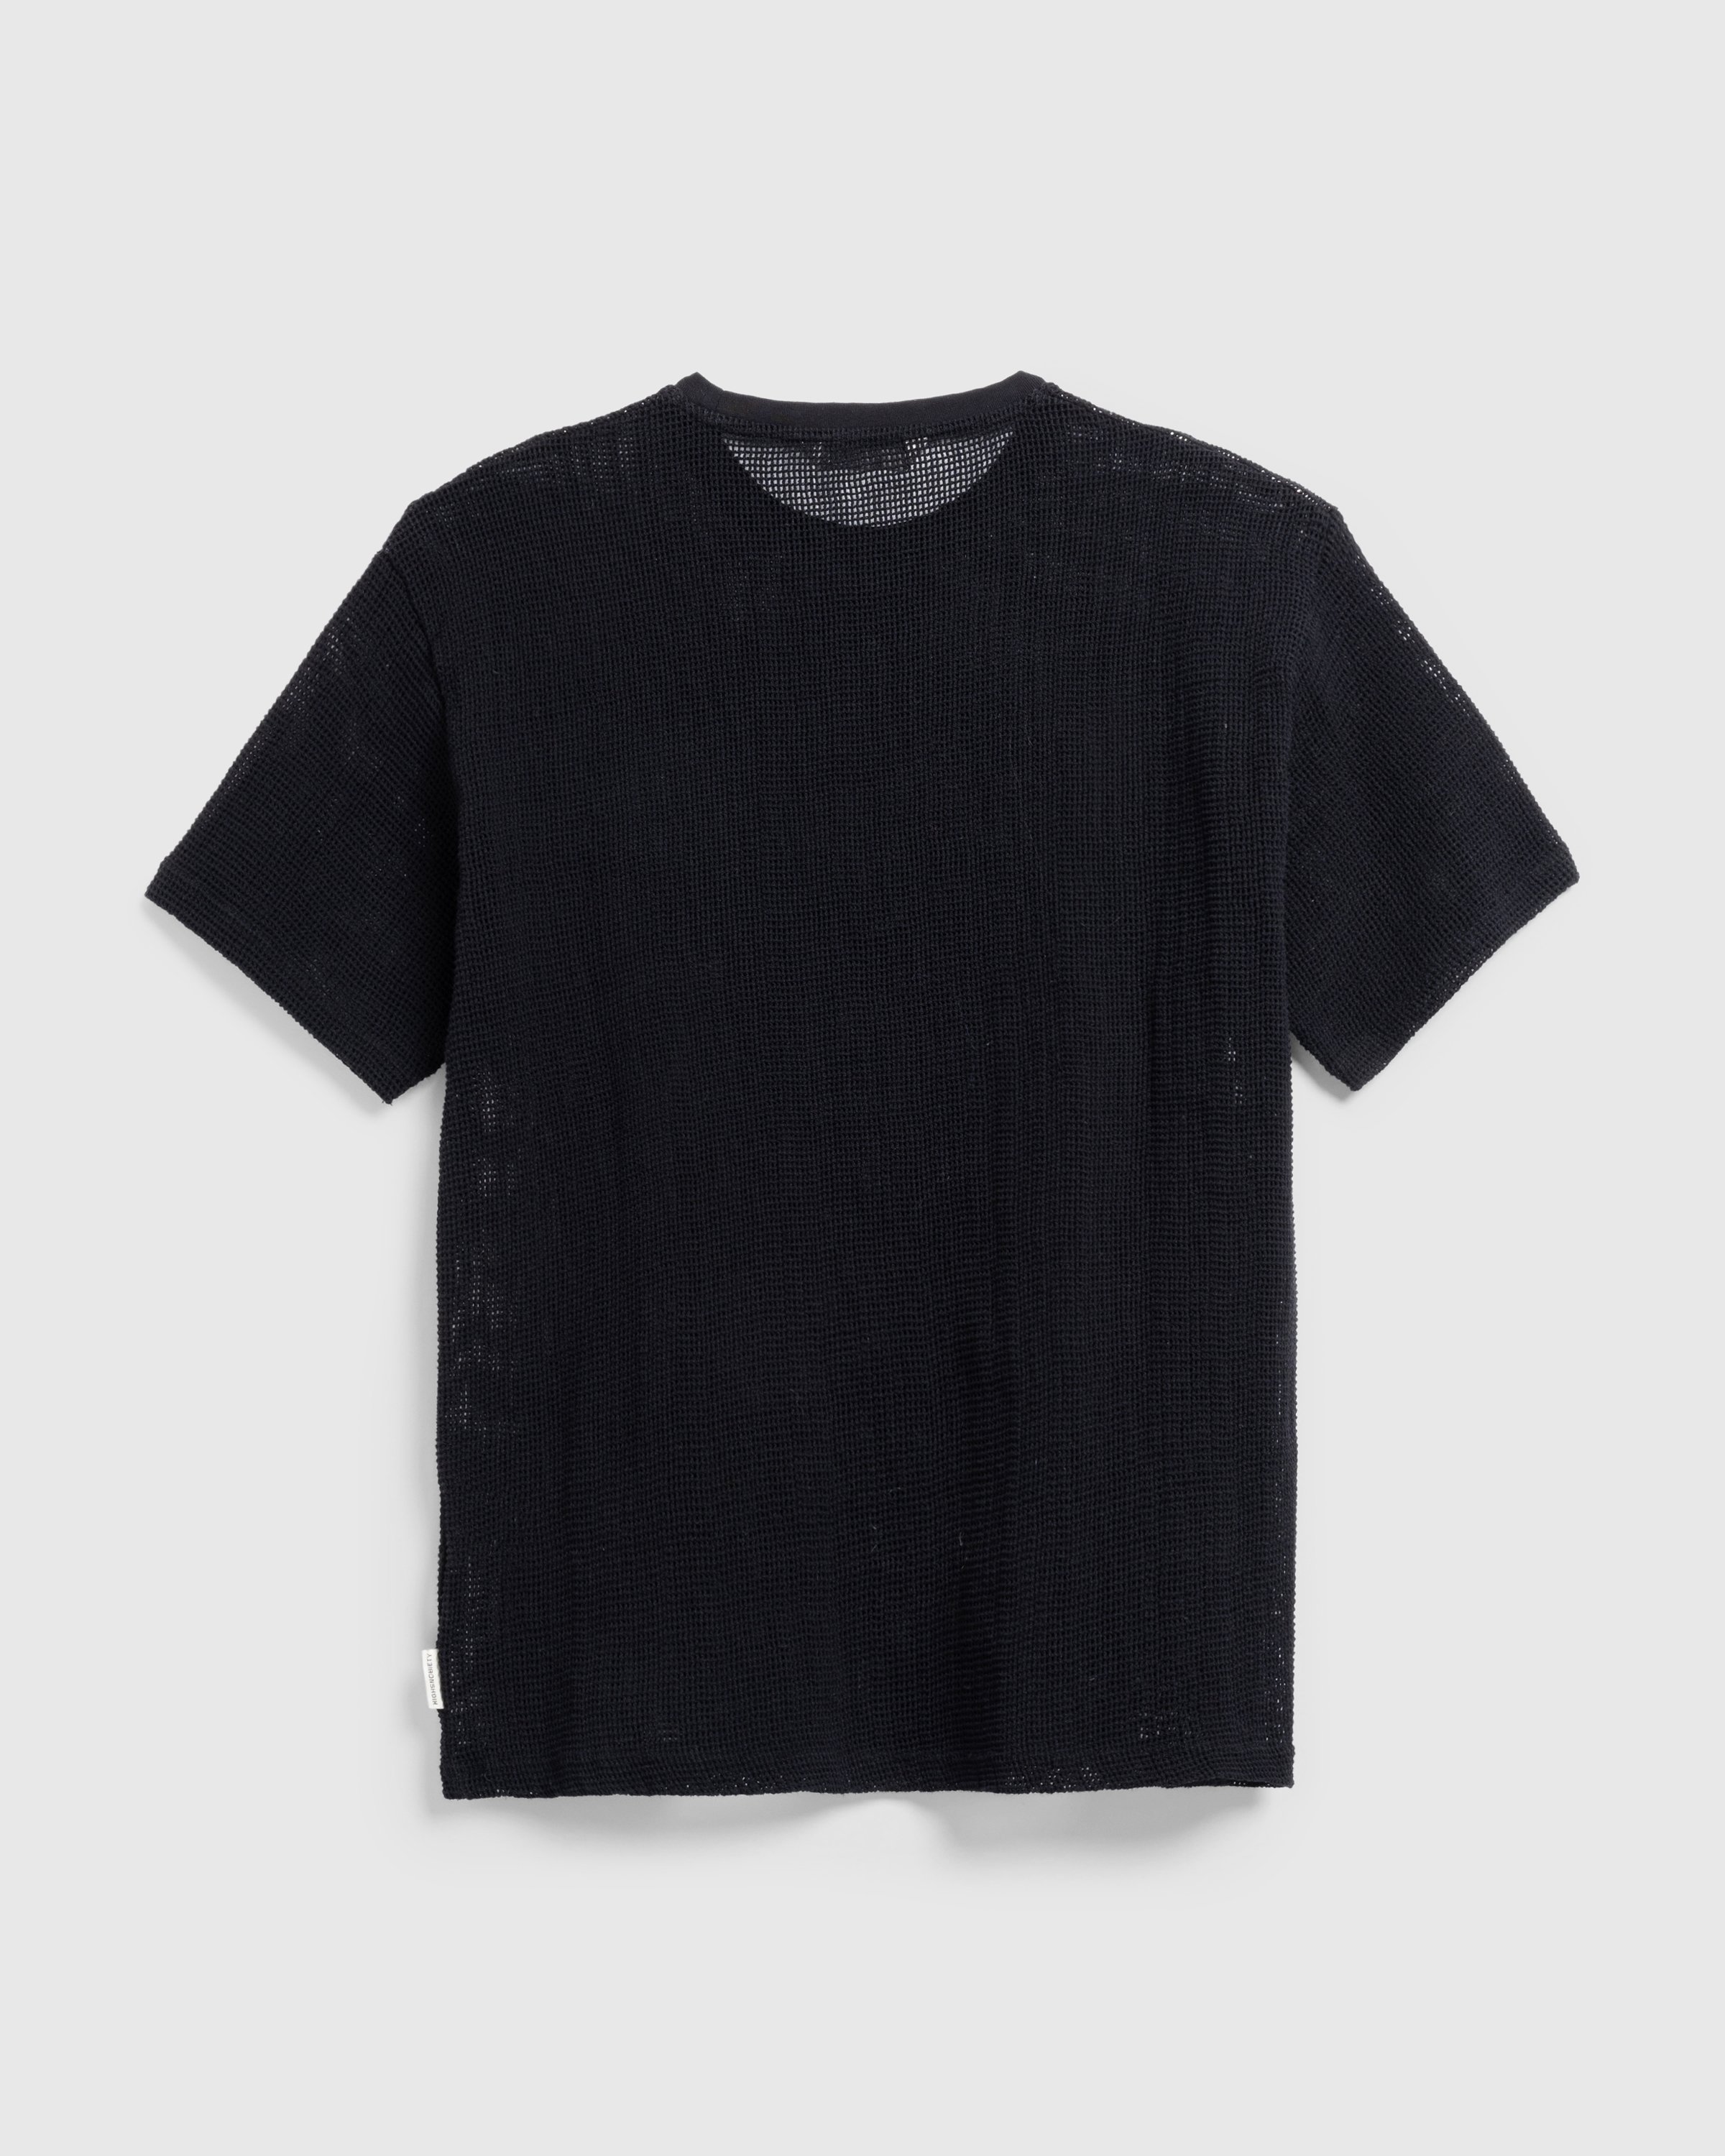 Highsnobiety HS05 - Pigment Dyed Cotton Mesh Knit - Clothing -  - Image 2